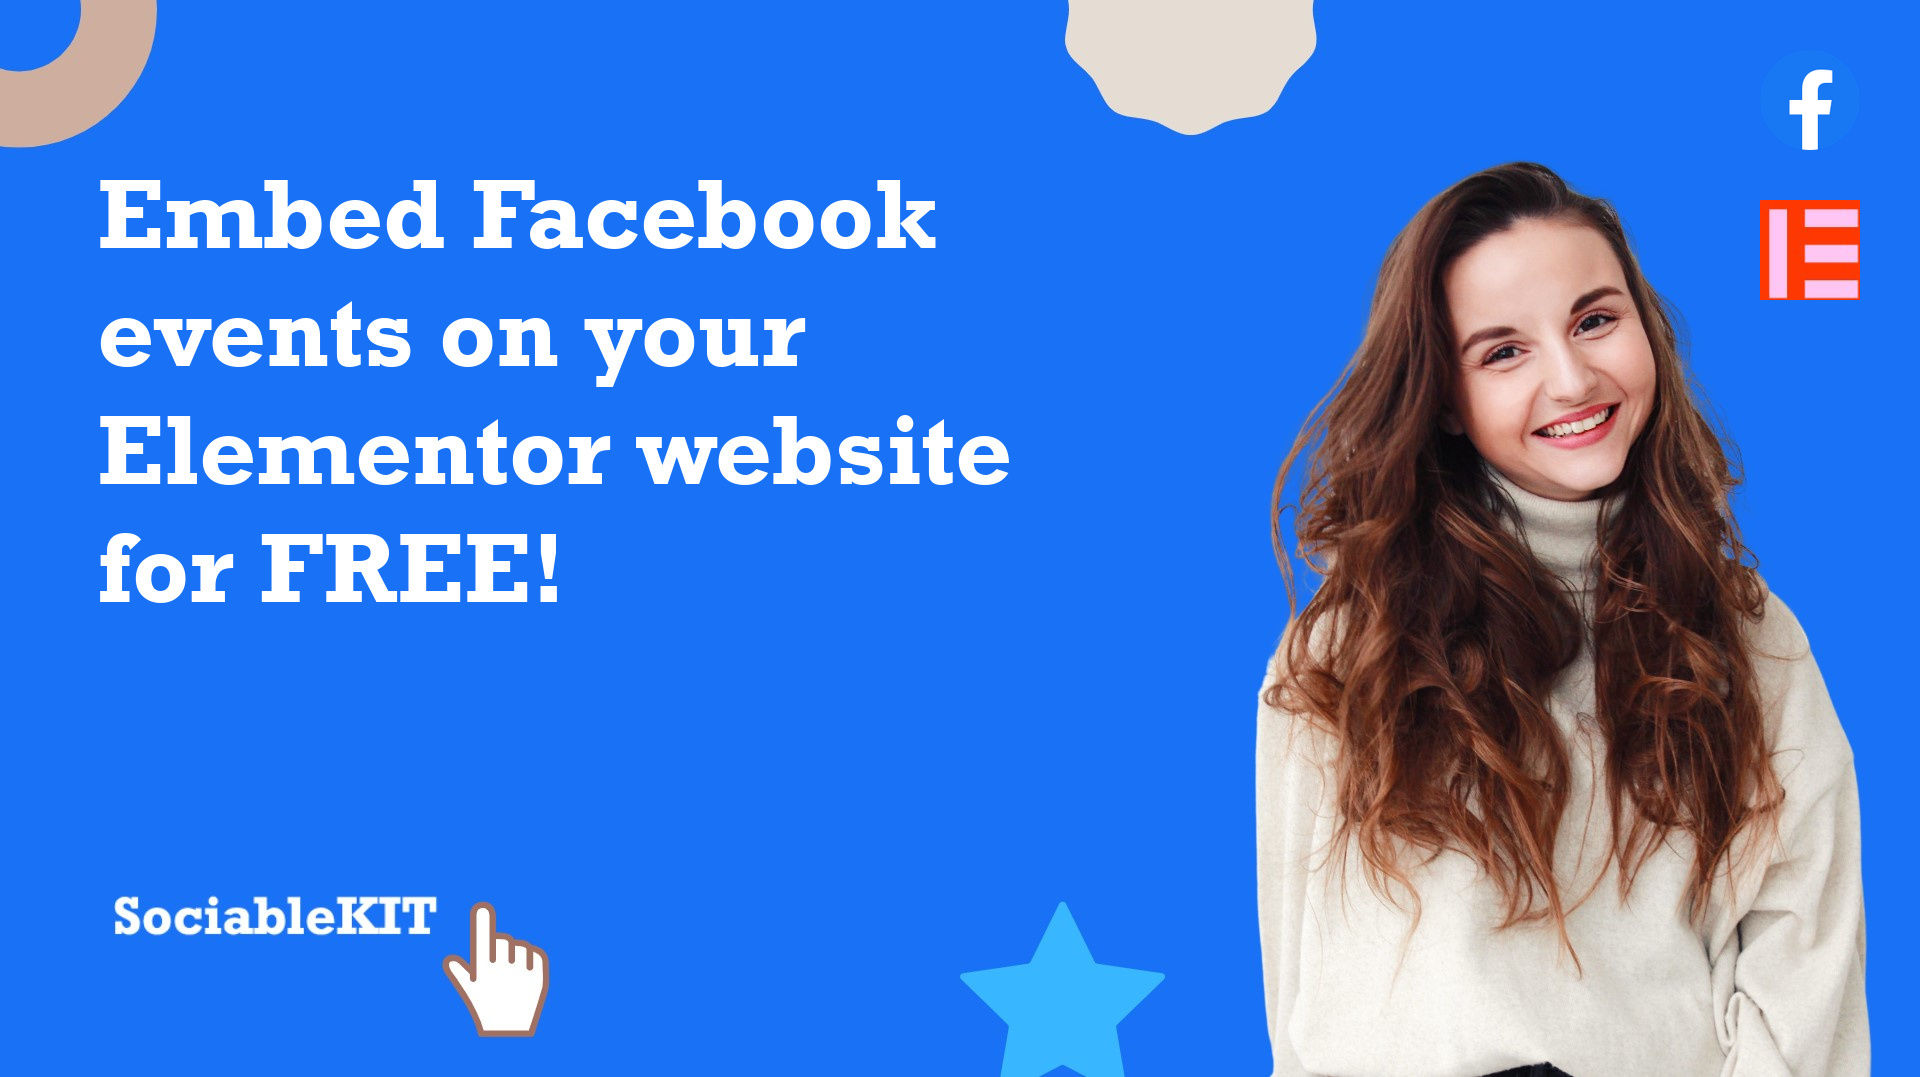 How to embed Facebook events on your Elementor website for FREE?